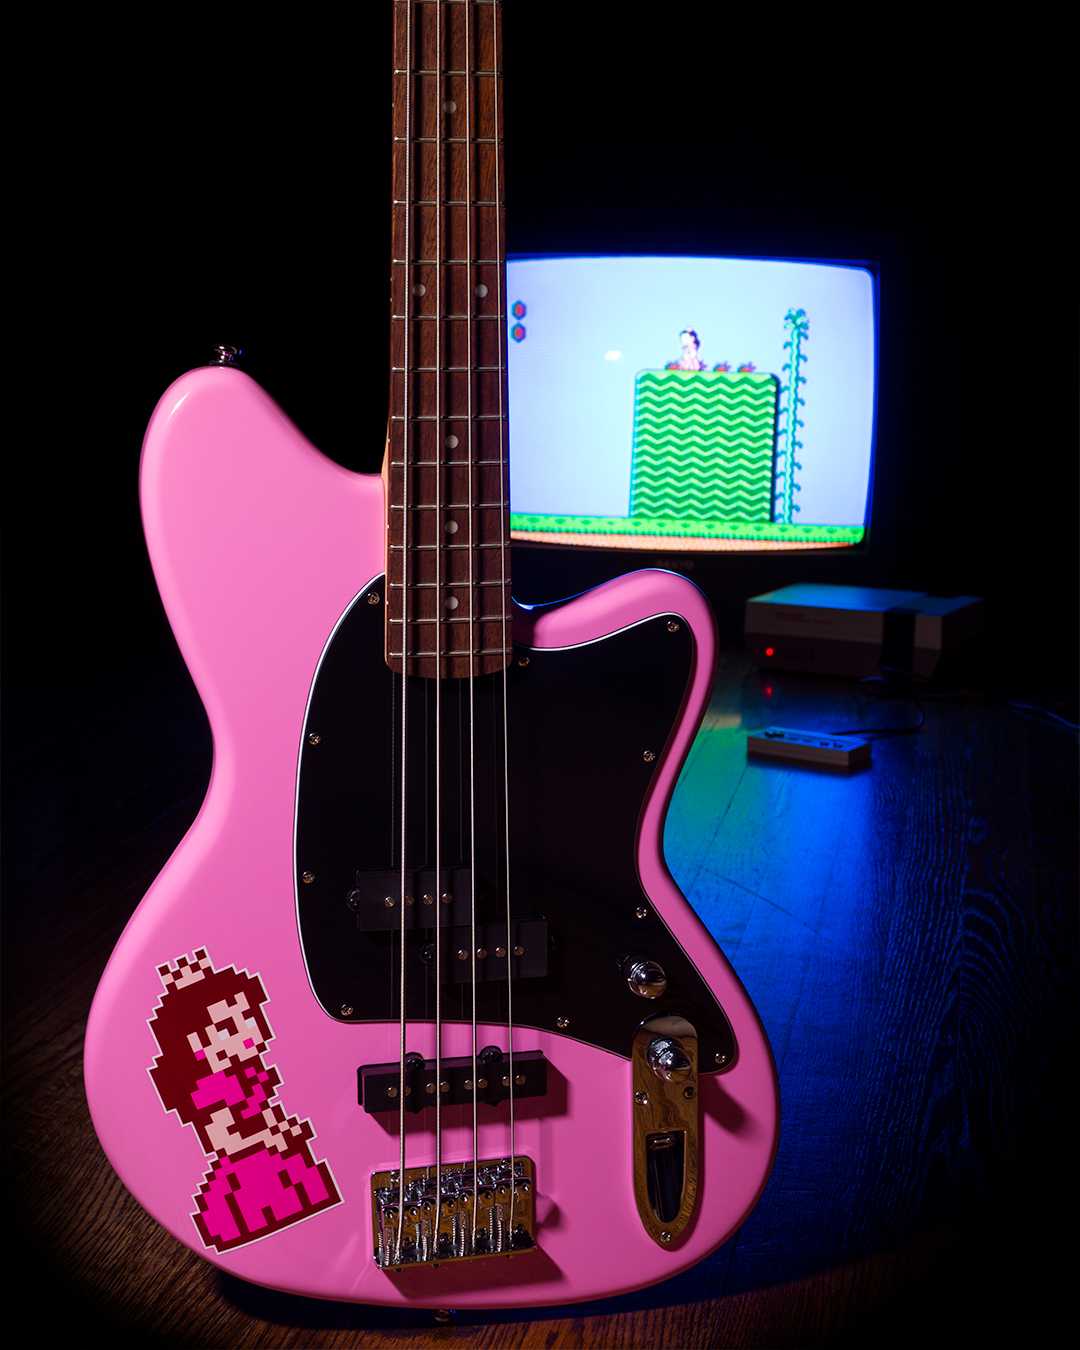 Talman Bass TMB100K-PP Peach Pink, with an 8-bit Princess Peach sticker on the front. Positined in front of an old tube TV and Nintendo Entertainment System playing Mario 2.